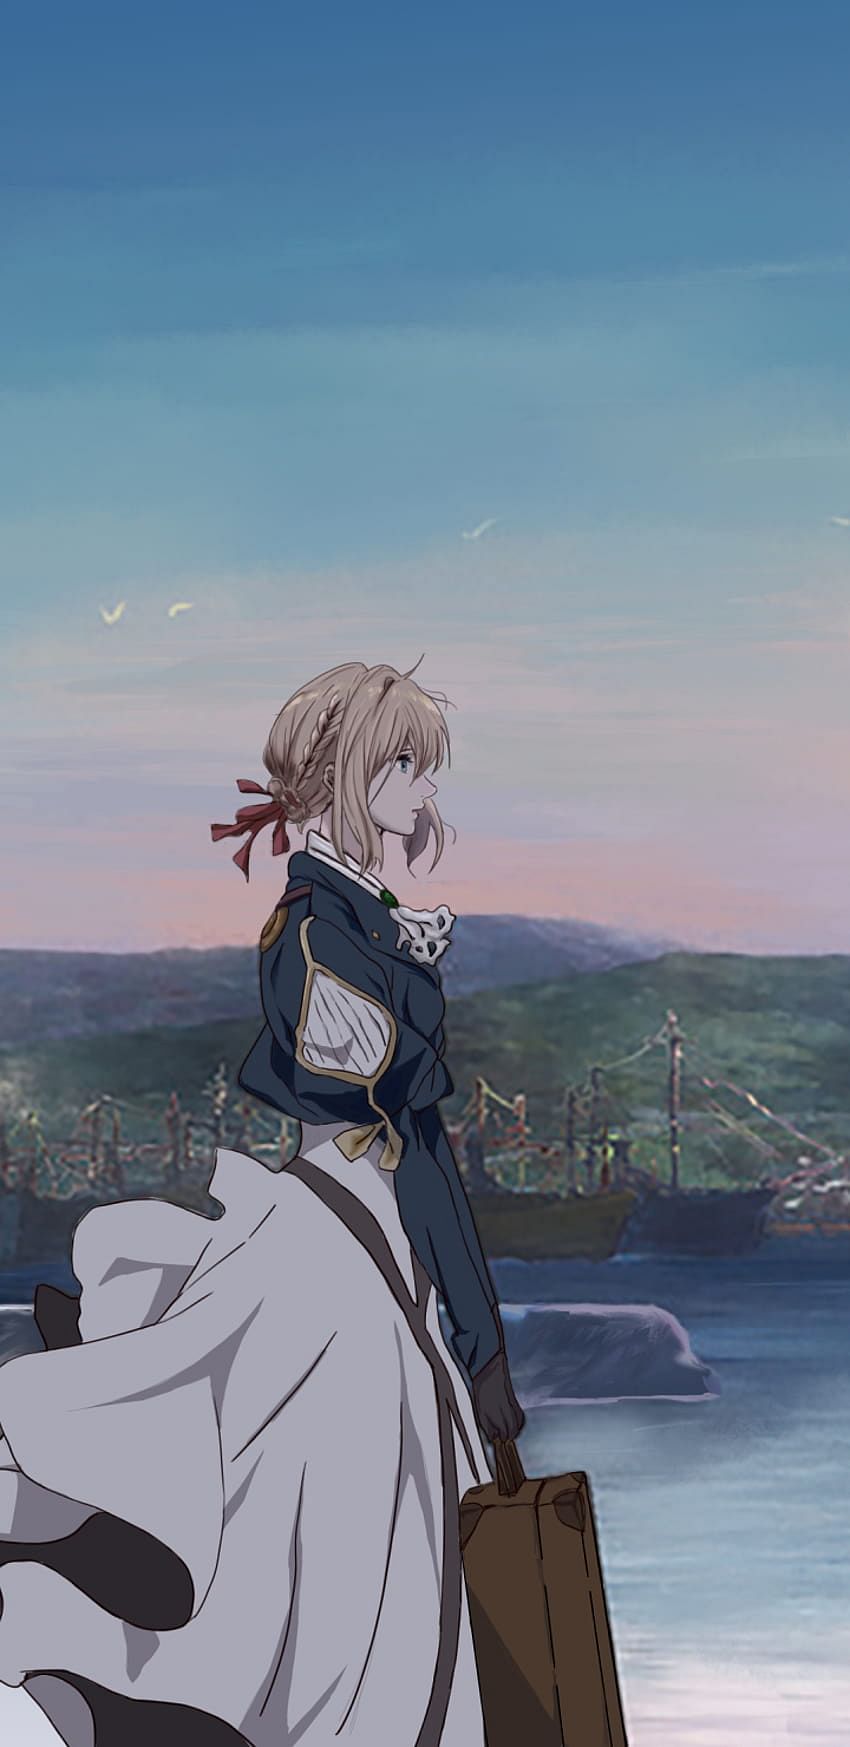 Learning to love: A tribute to KyoAni and Violet Evergarden – Starting Life  From Zero